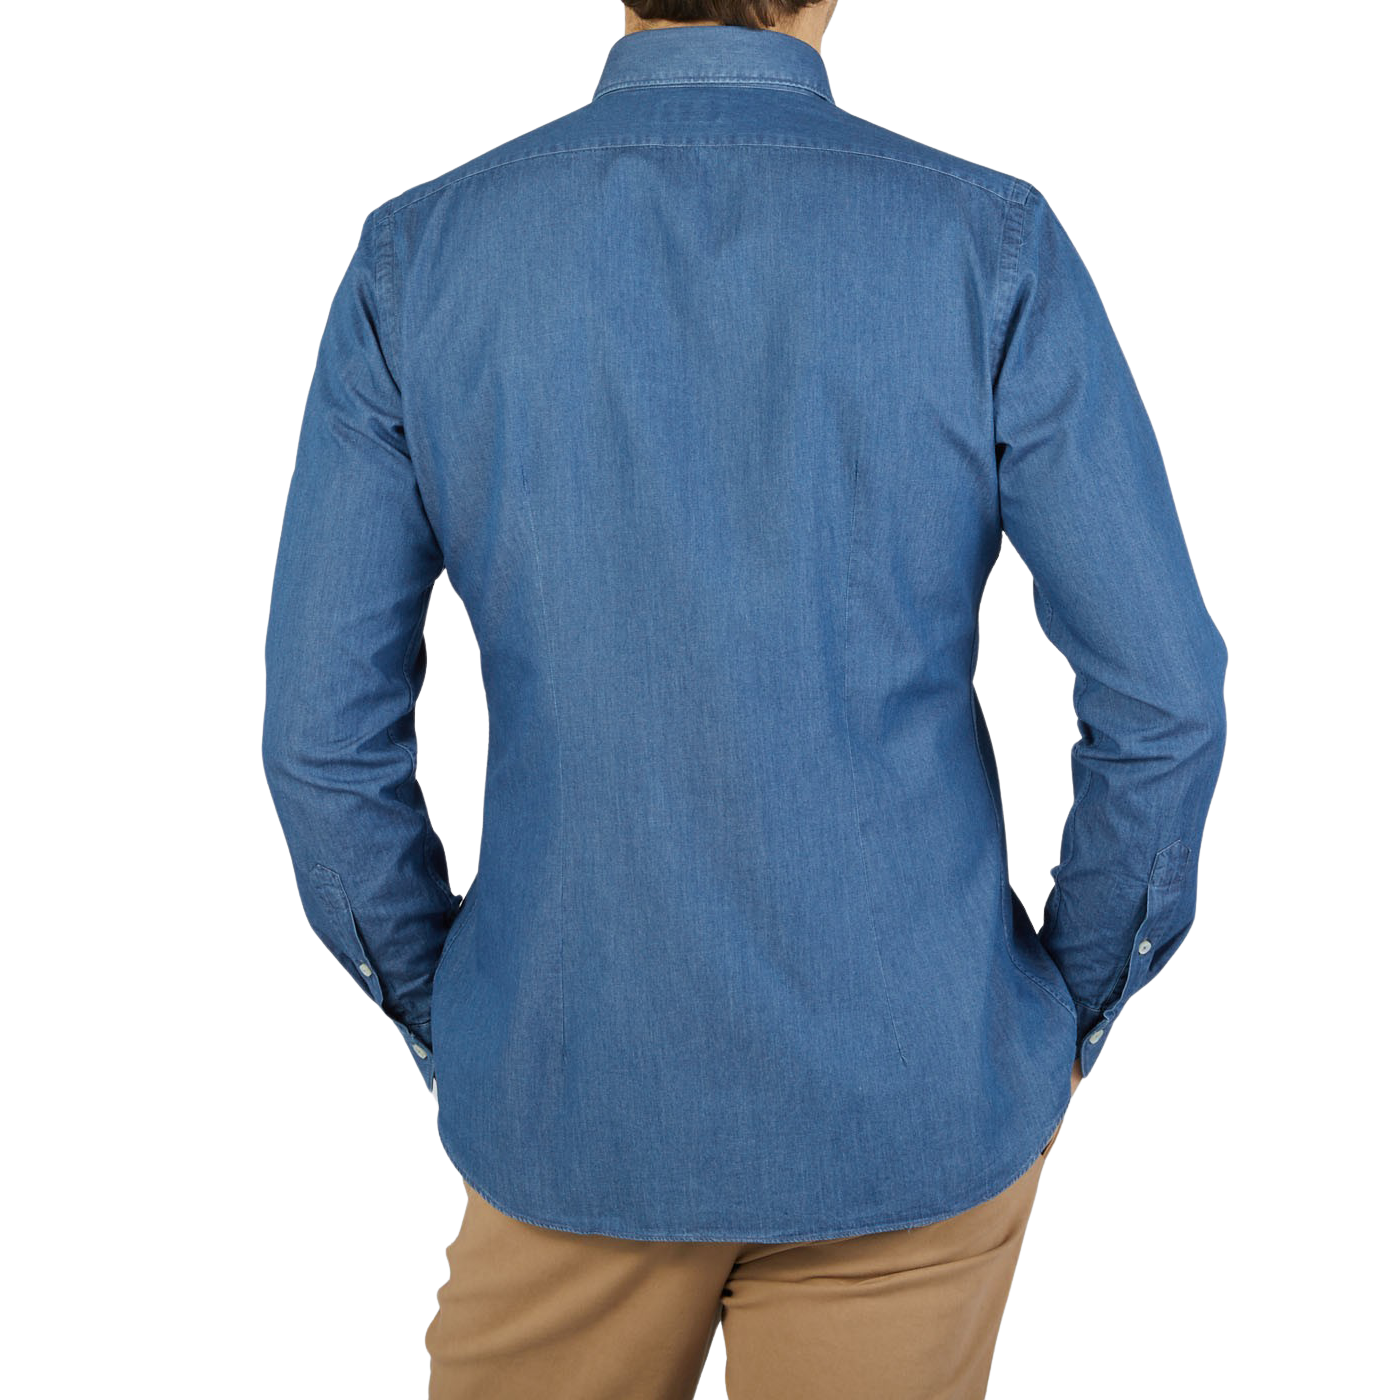 The back view of a man wearing a Xacus Slim Fit, Washed Blue Cotton Denim Casual Shirt.